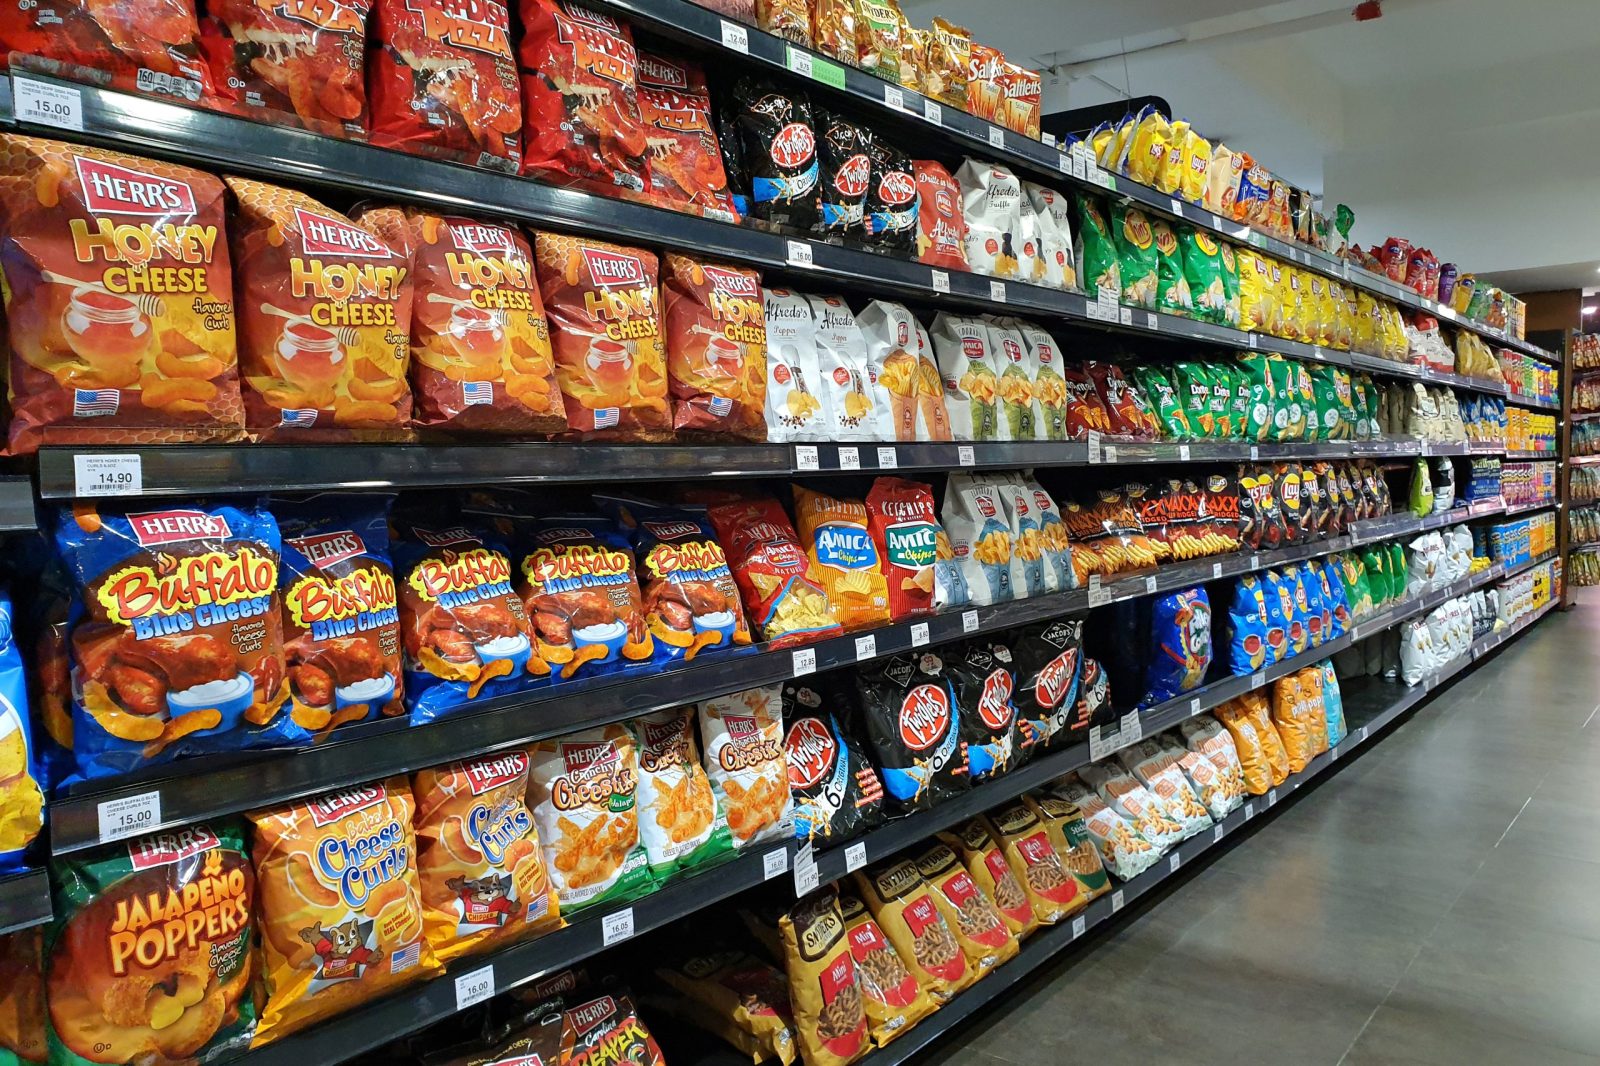 Bags of chips on shelves at grocery store